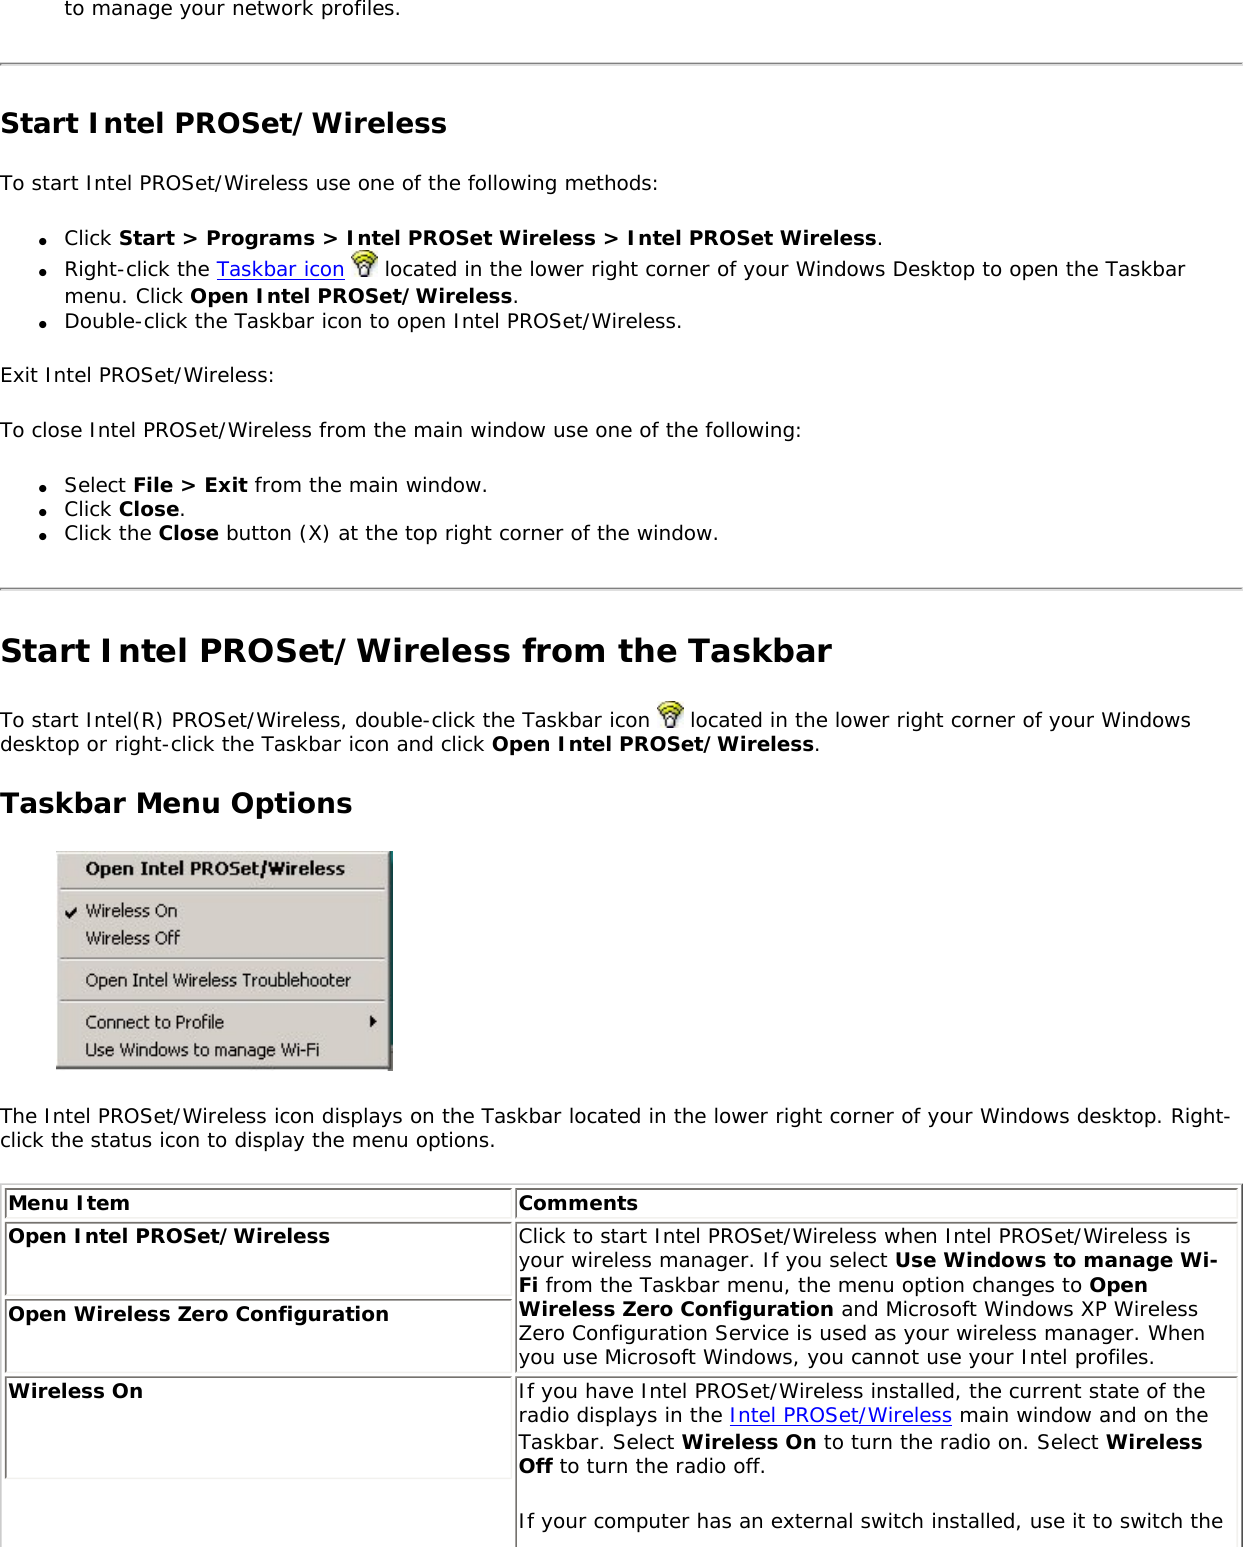 to manage your network profiles. Start Intel PROSet/WirelessTo start Intel PROSet/Wireless use one of the following methods: ●     Click Start &gt; Programs &gt; Intel PROSet Wireless &gt; Intel PROSet Wireless.●     Right-click the Taskbar icon   located in the lower right corner of your Windows Desktop to open the Taskbar menu. Click Open Intel PROSet/Wireless.●     Double-click the Taskbar icon to open Intel PROSet/Wireless.Exit Intel PROSet/Wireless: To close Intel PROSet/Wireless from the main window use one of the following: ●     Select File &gt; Exit from the main window. ●     Click Close.●     Click the Close button (X) at the top right corner of the window. Start Intel PROSet/Wireless from the TaskbarTo start Intel(R) PROSet/Wireless, double-click the Taskbar icon   located in the lower right corner of your Windows desktop or right-click the Taskbar icon and click Open Intel PROSet/Wireless. Taskbar Menu Options The Intel PROSet/Wireless icon displays on the Taskbar located in the lower right corner of your Windows desktop. Right-click the status icon to display the menu options. Menu Item CommentsOpen Intel PROSet/Wireless Click to start Intel PROSet/Wireless when Intel PROSet/Wireless is your wireless manager. If you select Use Windows to manage Wi-Fi from the Taskbar menu, the menu option changes to Open Wireless Zero Configuration and Microsoft Windows XP Wireless Zero Configuration Service is used as your wireless manager. When you use Microsoft Windows, you cannot use your Intel profiles. Open Wireless Zero Configuration Wireless On  If you have Intel PROSet/Wireless installed, the current state of the radio displays in the Intel PROSet/Wireless main window and on the Taskbar. Select Wireless On to turn the radio on. Select Wireless Off to turn the radio off. If your computer has an external switch installed, use it to switch the 